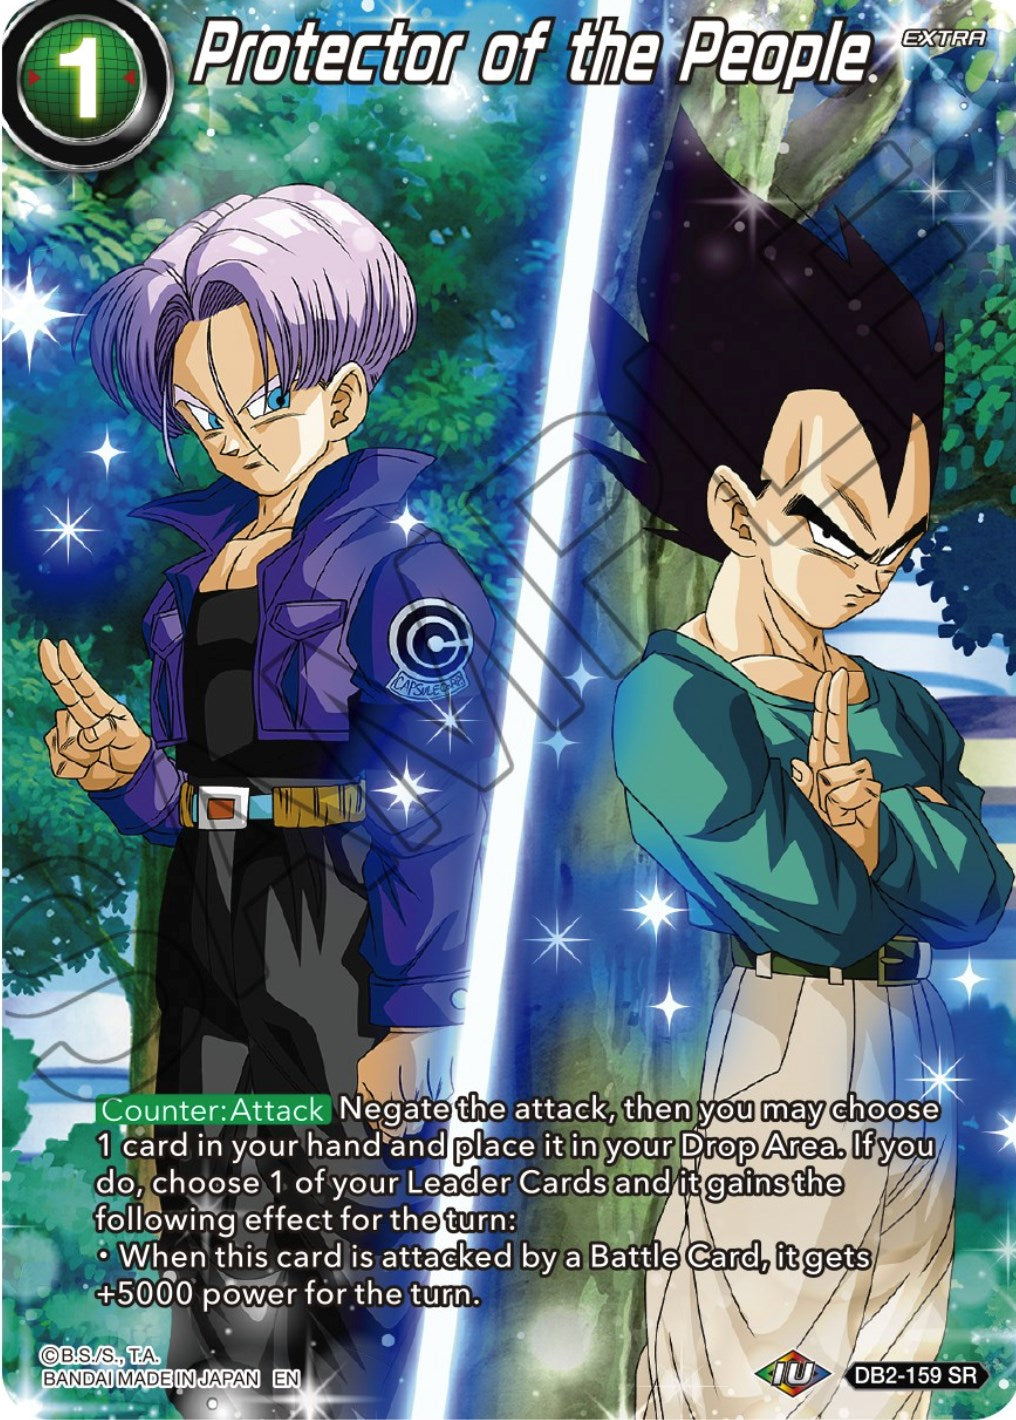 Protector of the People (DB2-159) [Theme Selection: History of Vegeta] | Black Swamp Games